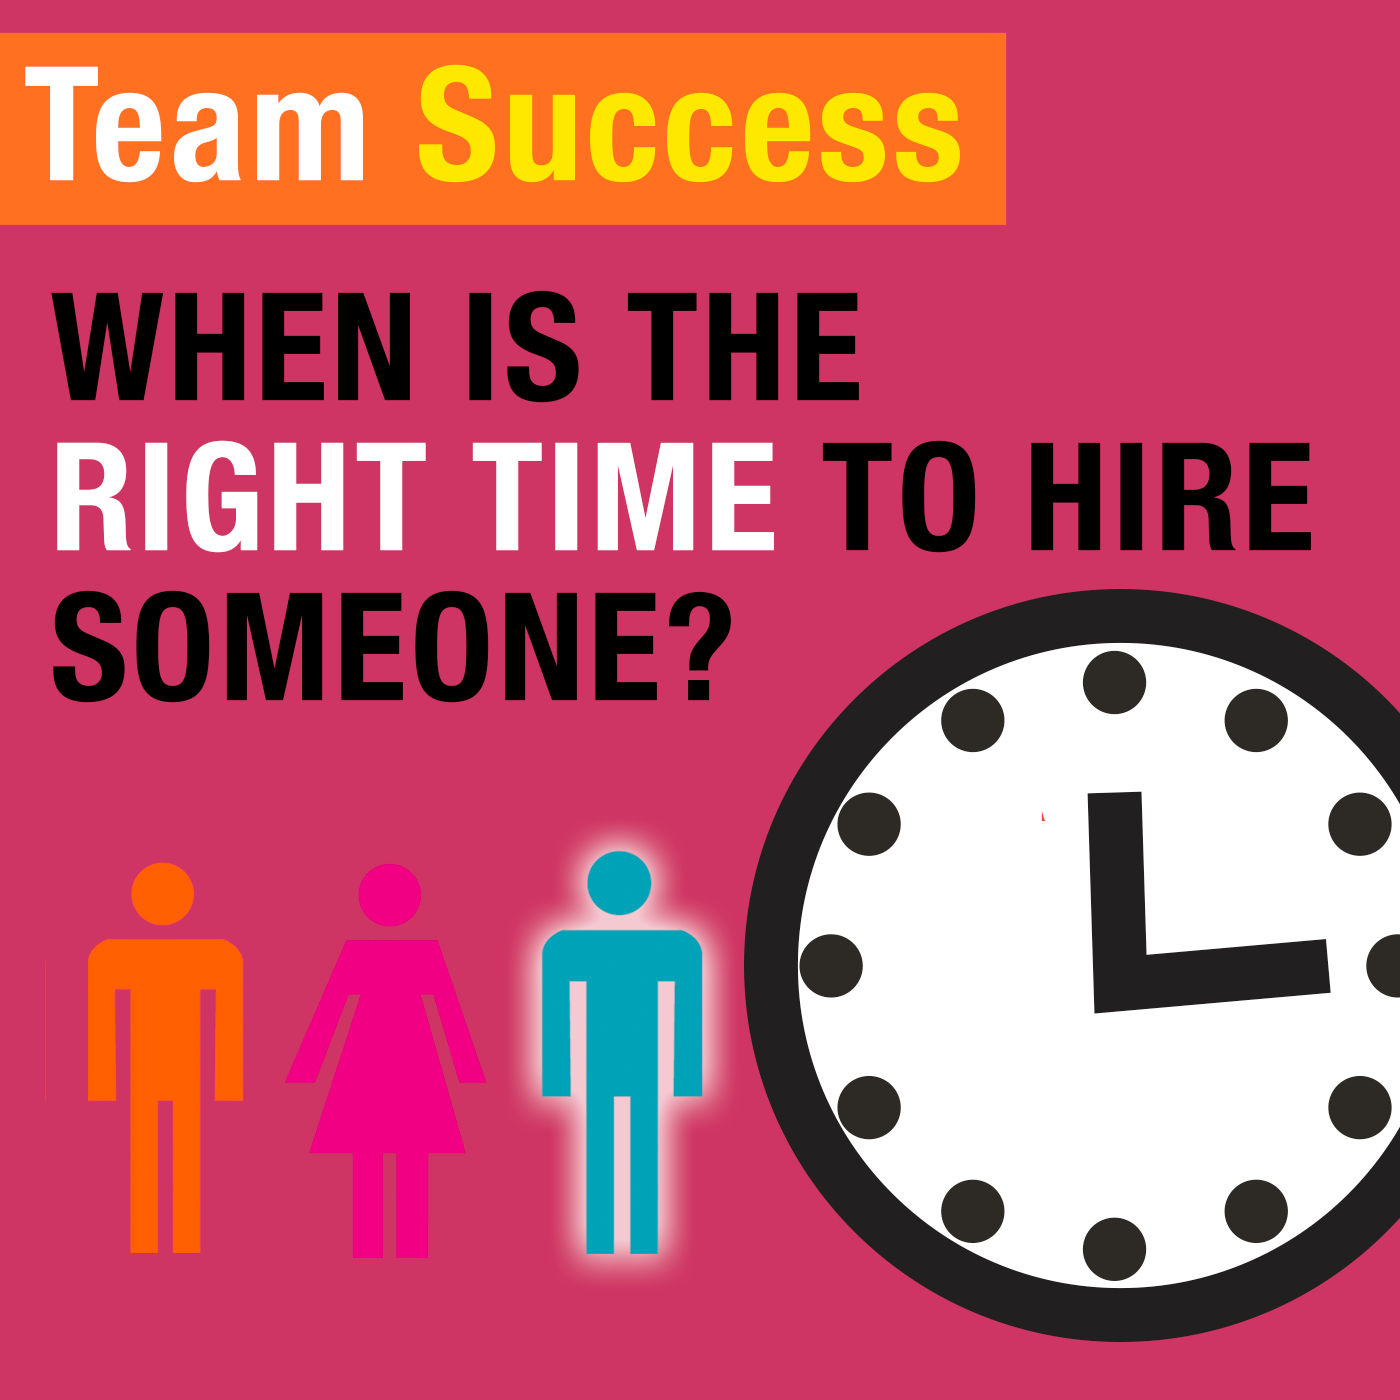 When Is The Right Time To Hire Someone?